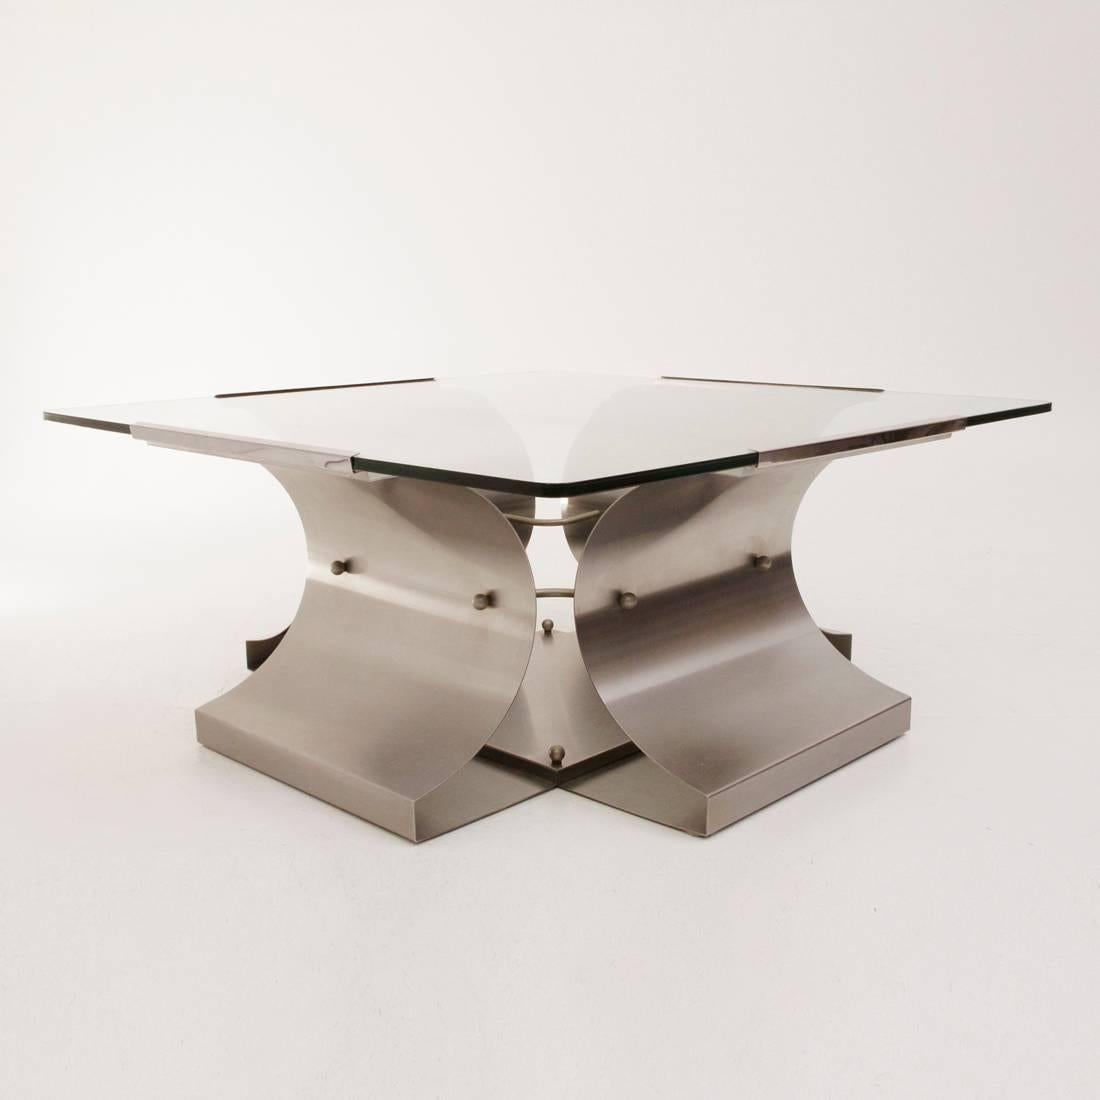 French table produced in the 1970s by Kappa and designed by Francois Monnet.
Stainless steel frame with glass top.
Good general condition, small chipping on the floor under the lock of the structure, visible in photos.
 Dimensions: Width 90 cm